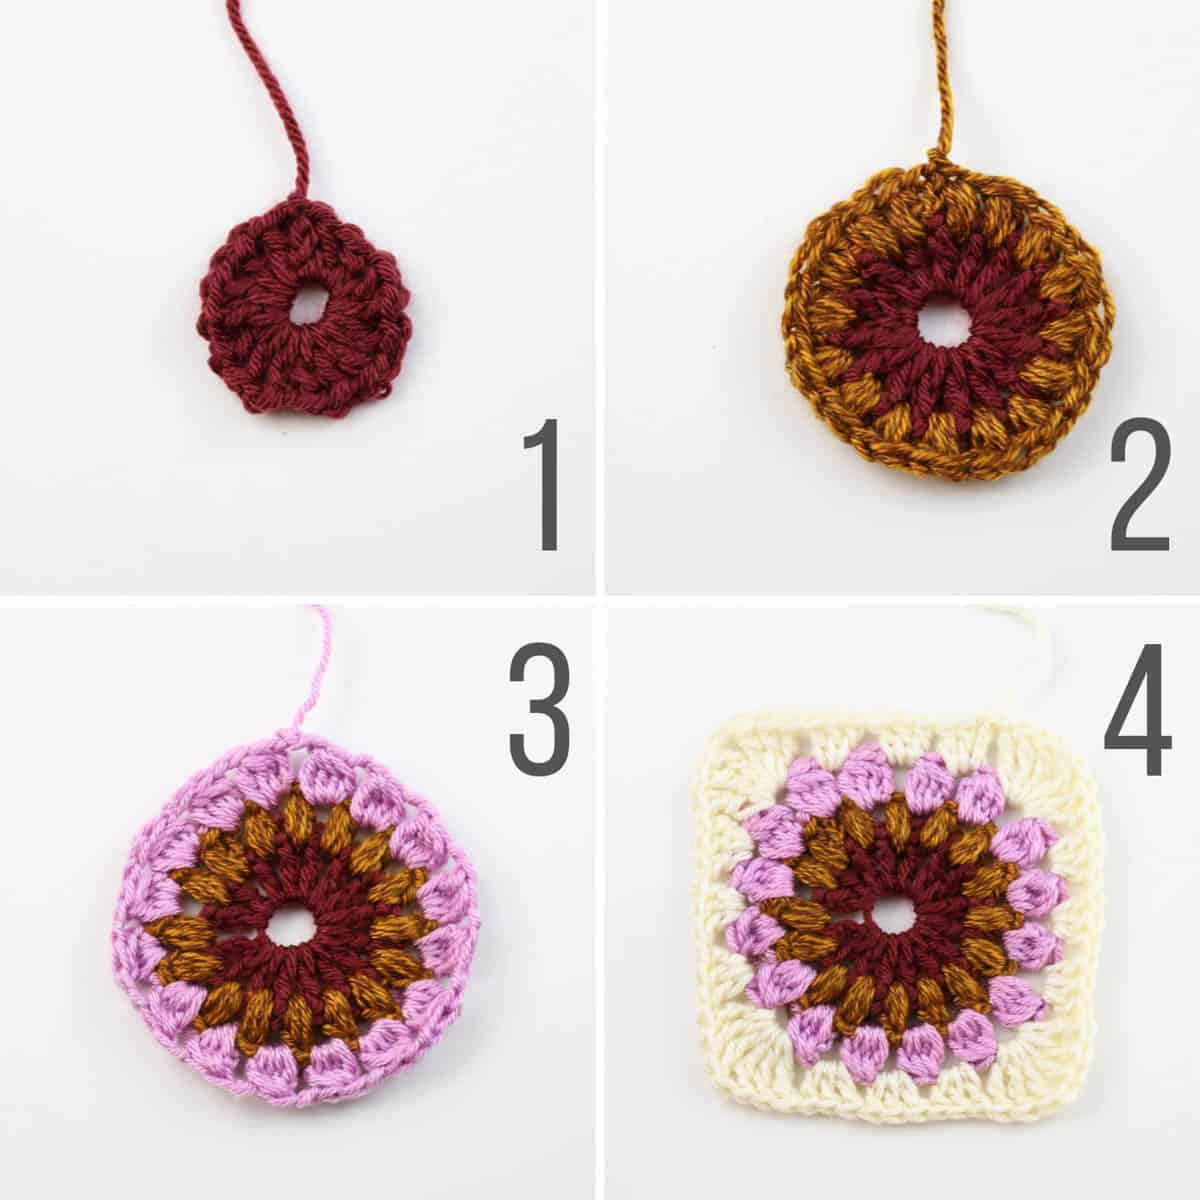 step-by-step instructions for how to crochet a granny square. Tutorial features Lion Brand Basic Stitch yarn.